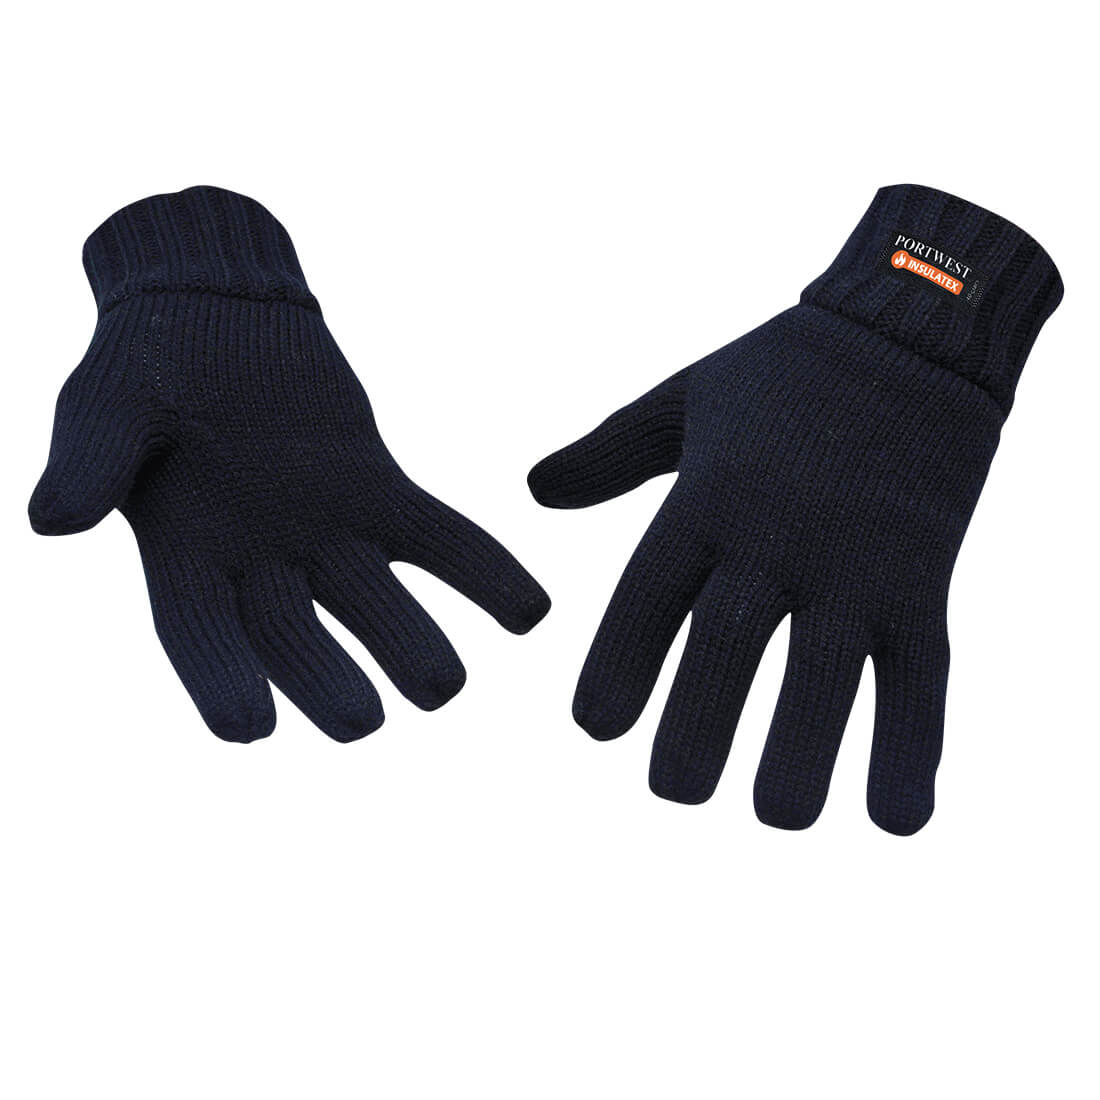 Knit Glove Insulatex Lined - Navy